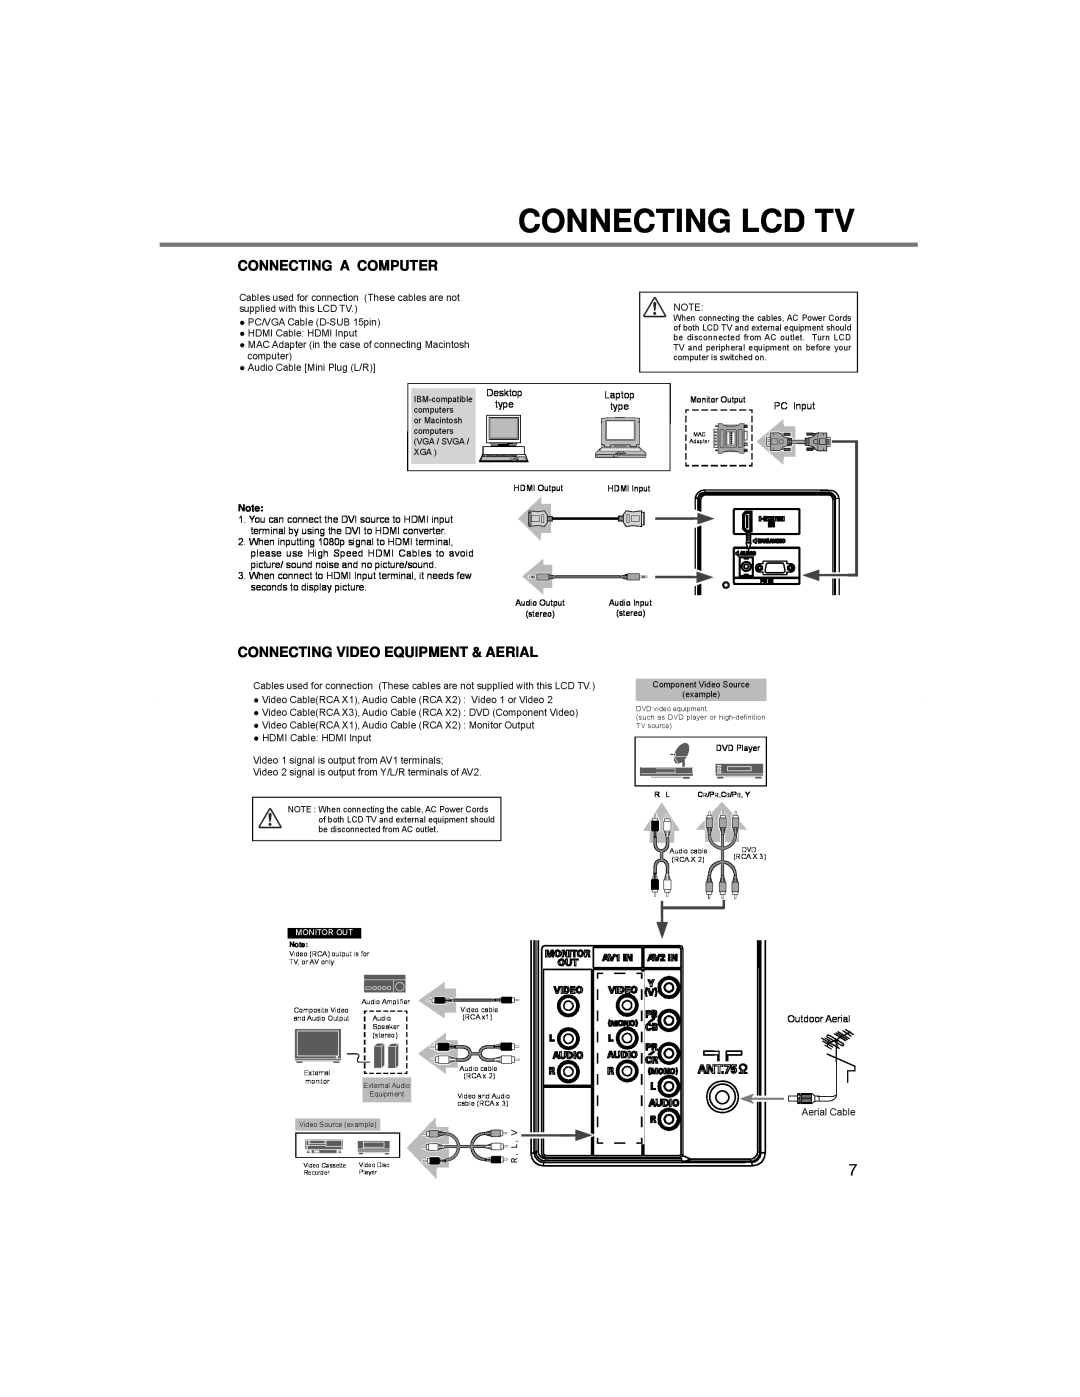 Sanyo LCE-24C100F(R), LCE-24C100F(S) Connecting A Computer, Connecting Video Equipment & Aerial, Connecting Lcd Tv 